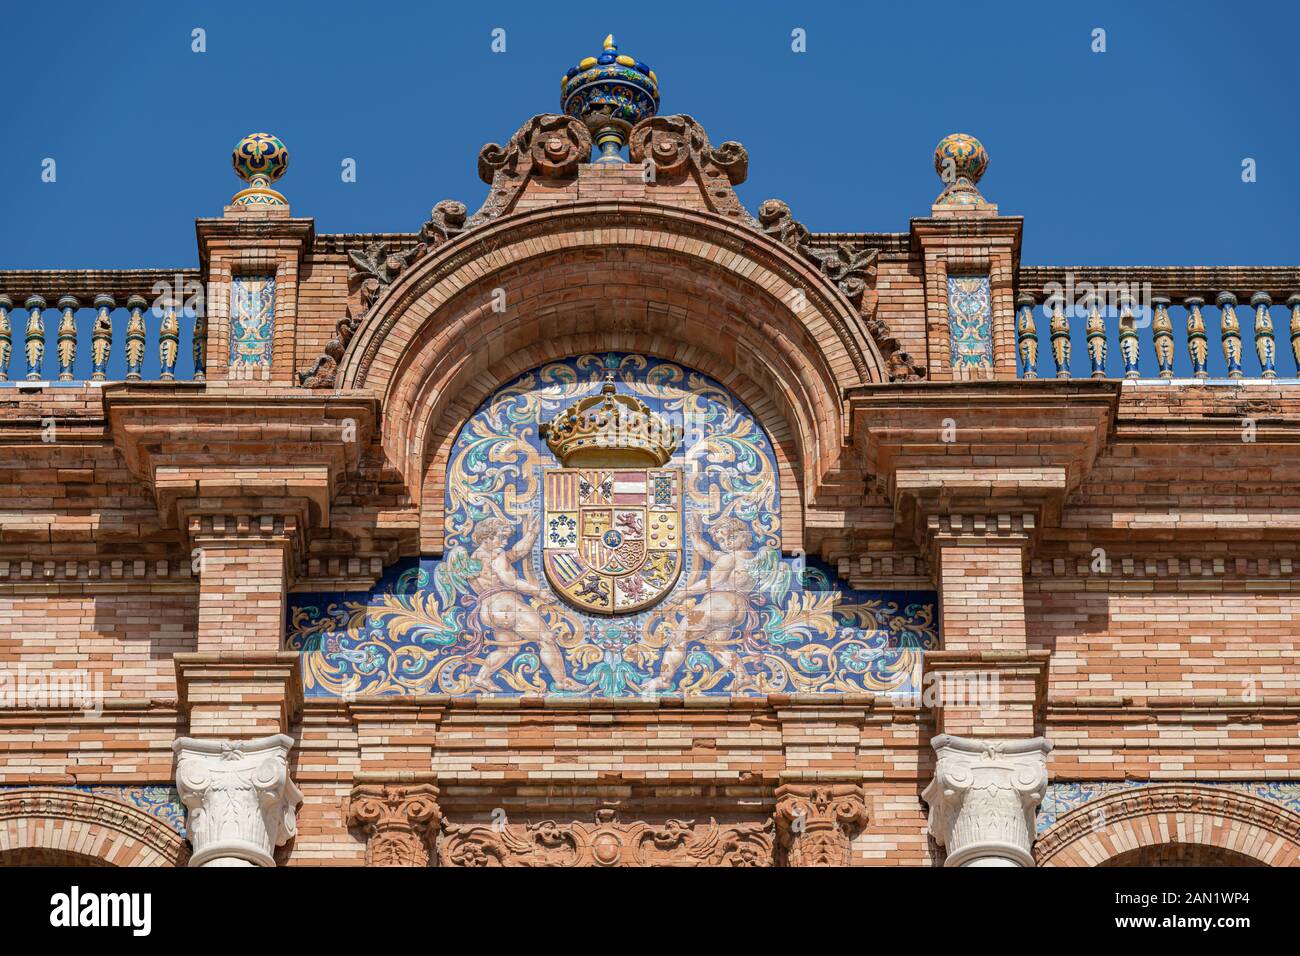 The central arch of Aníbal González's 1929 Plaza de España building with its azulejos (tiled) crest and decoration, balustrade, and colourful urn. Stock Photo